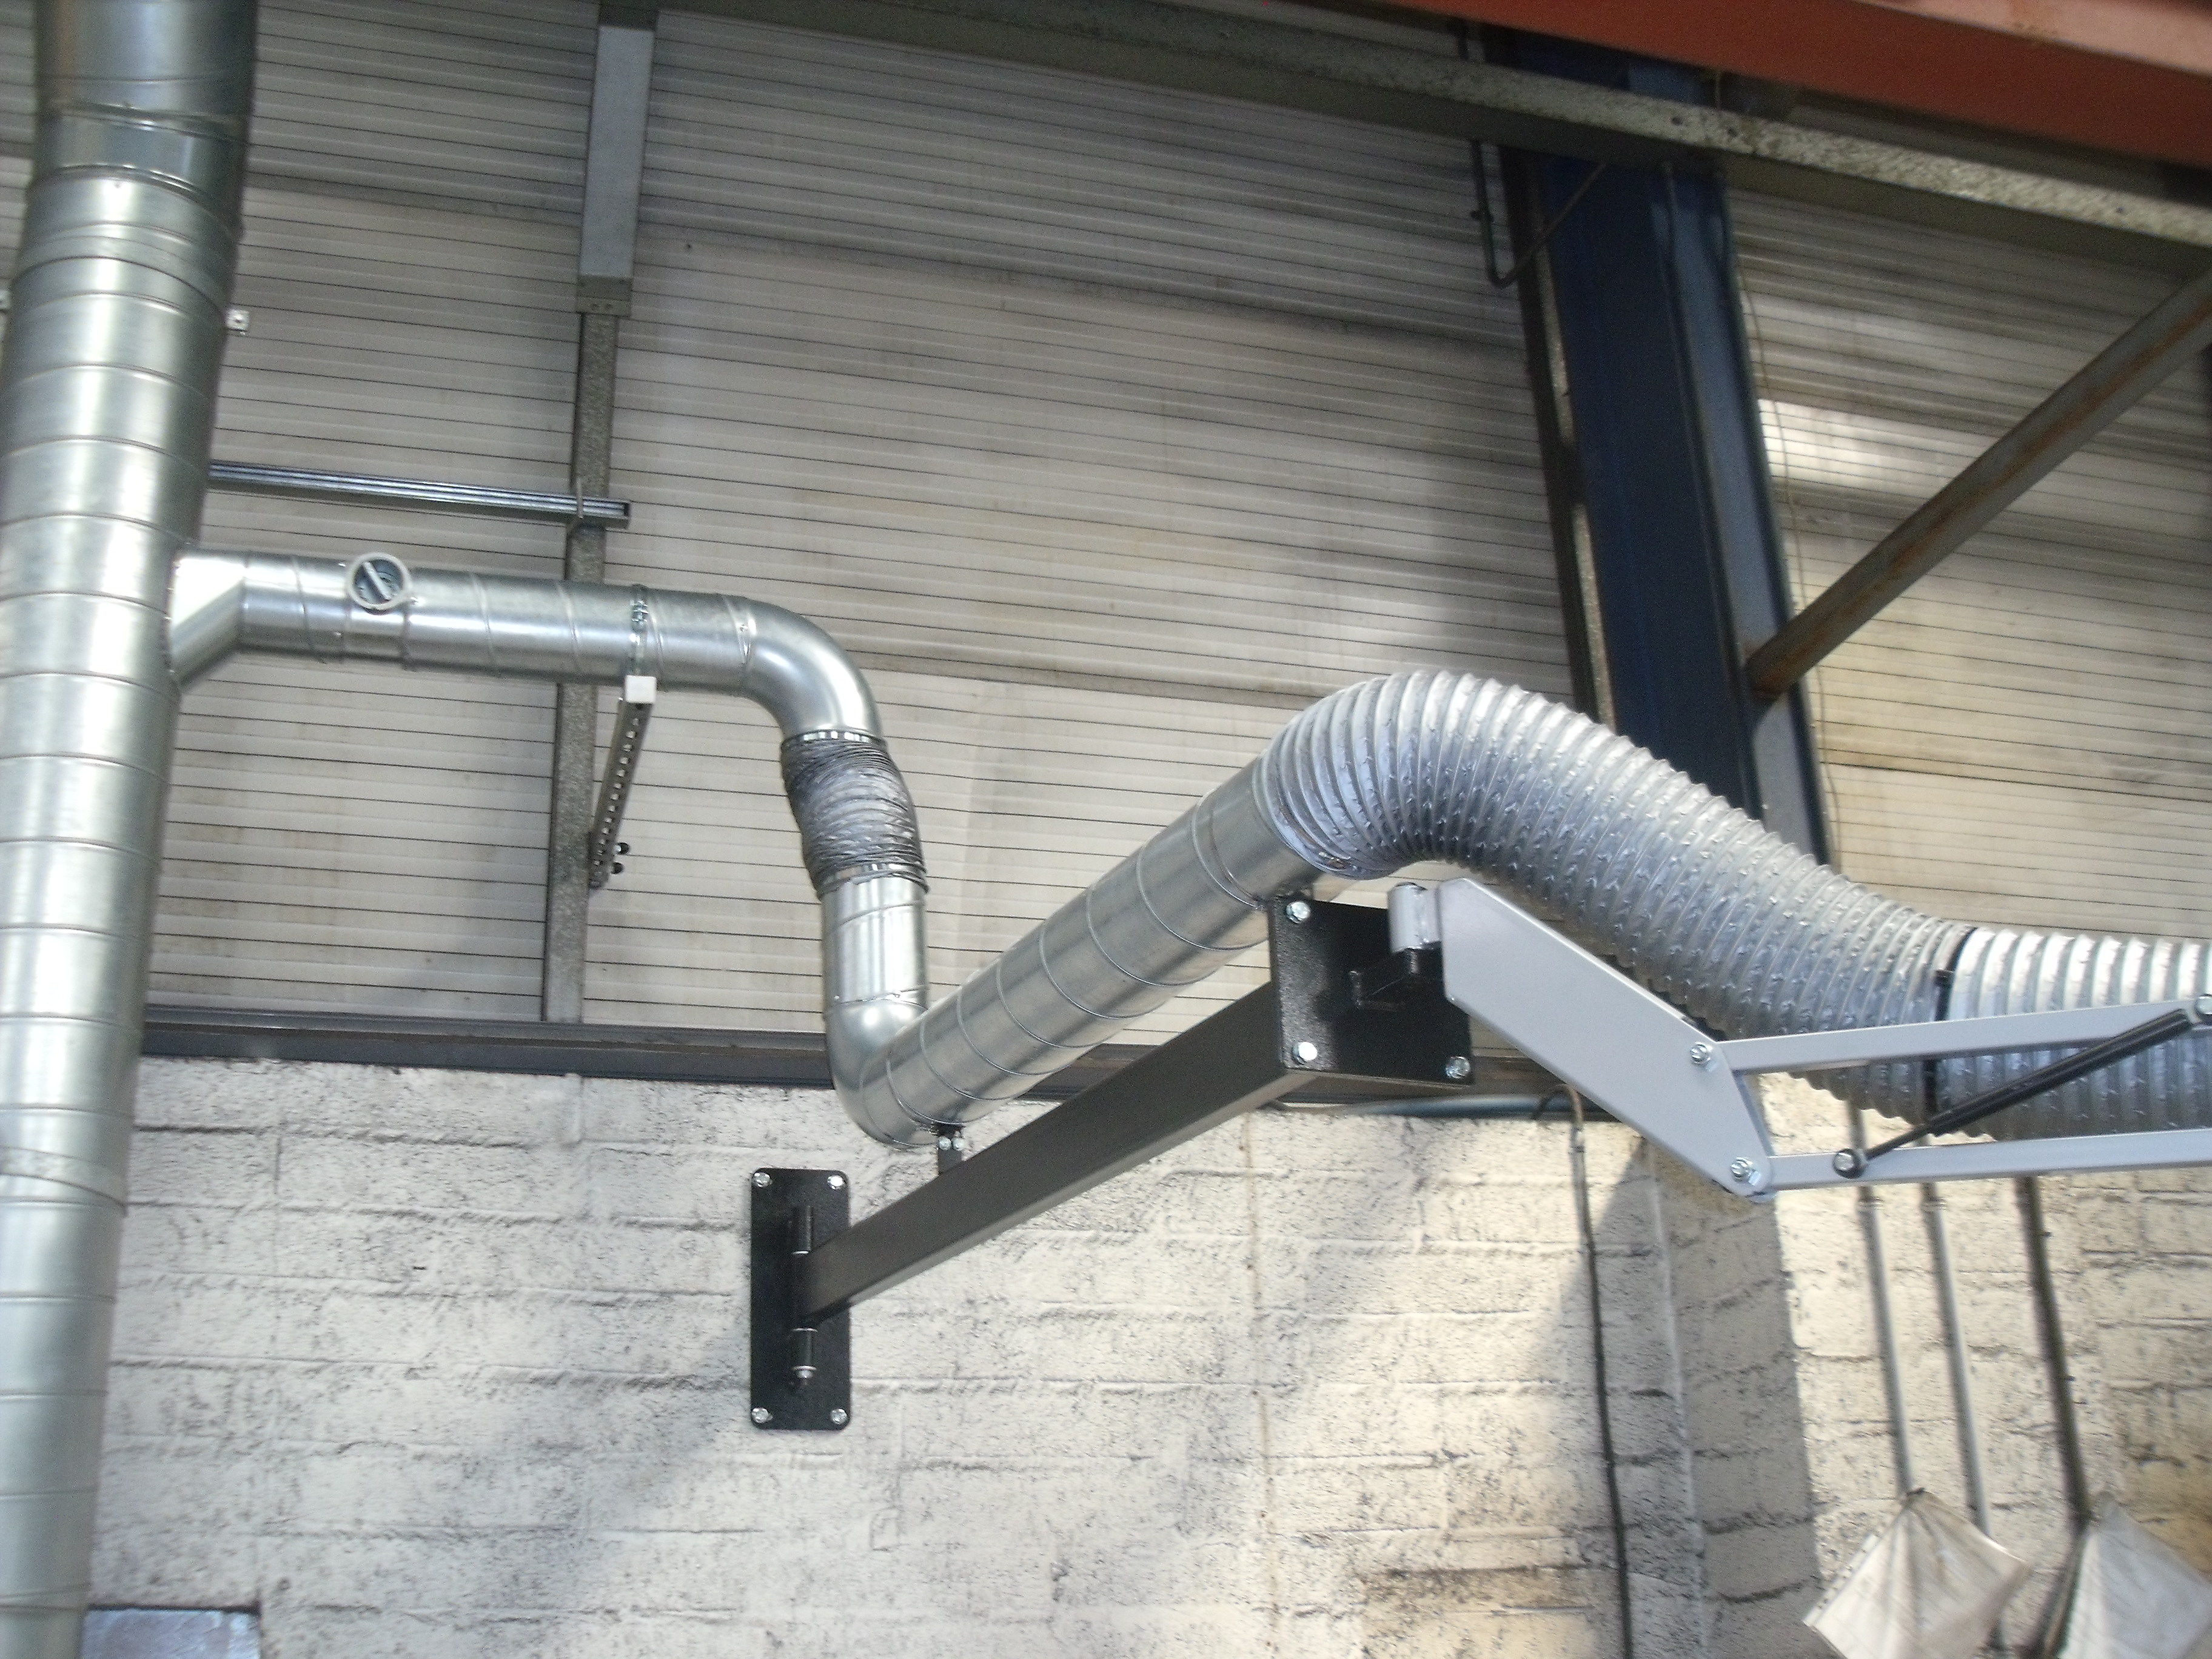 2m silver extension boom attached to factory wall